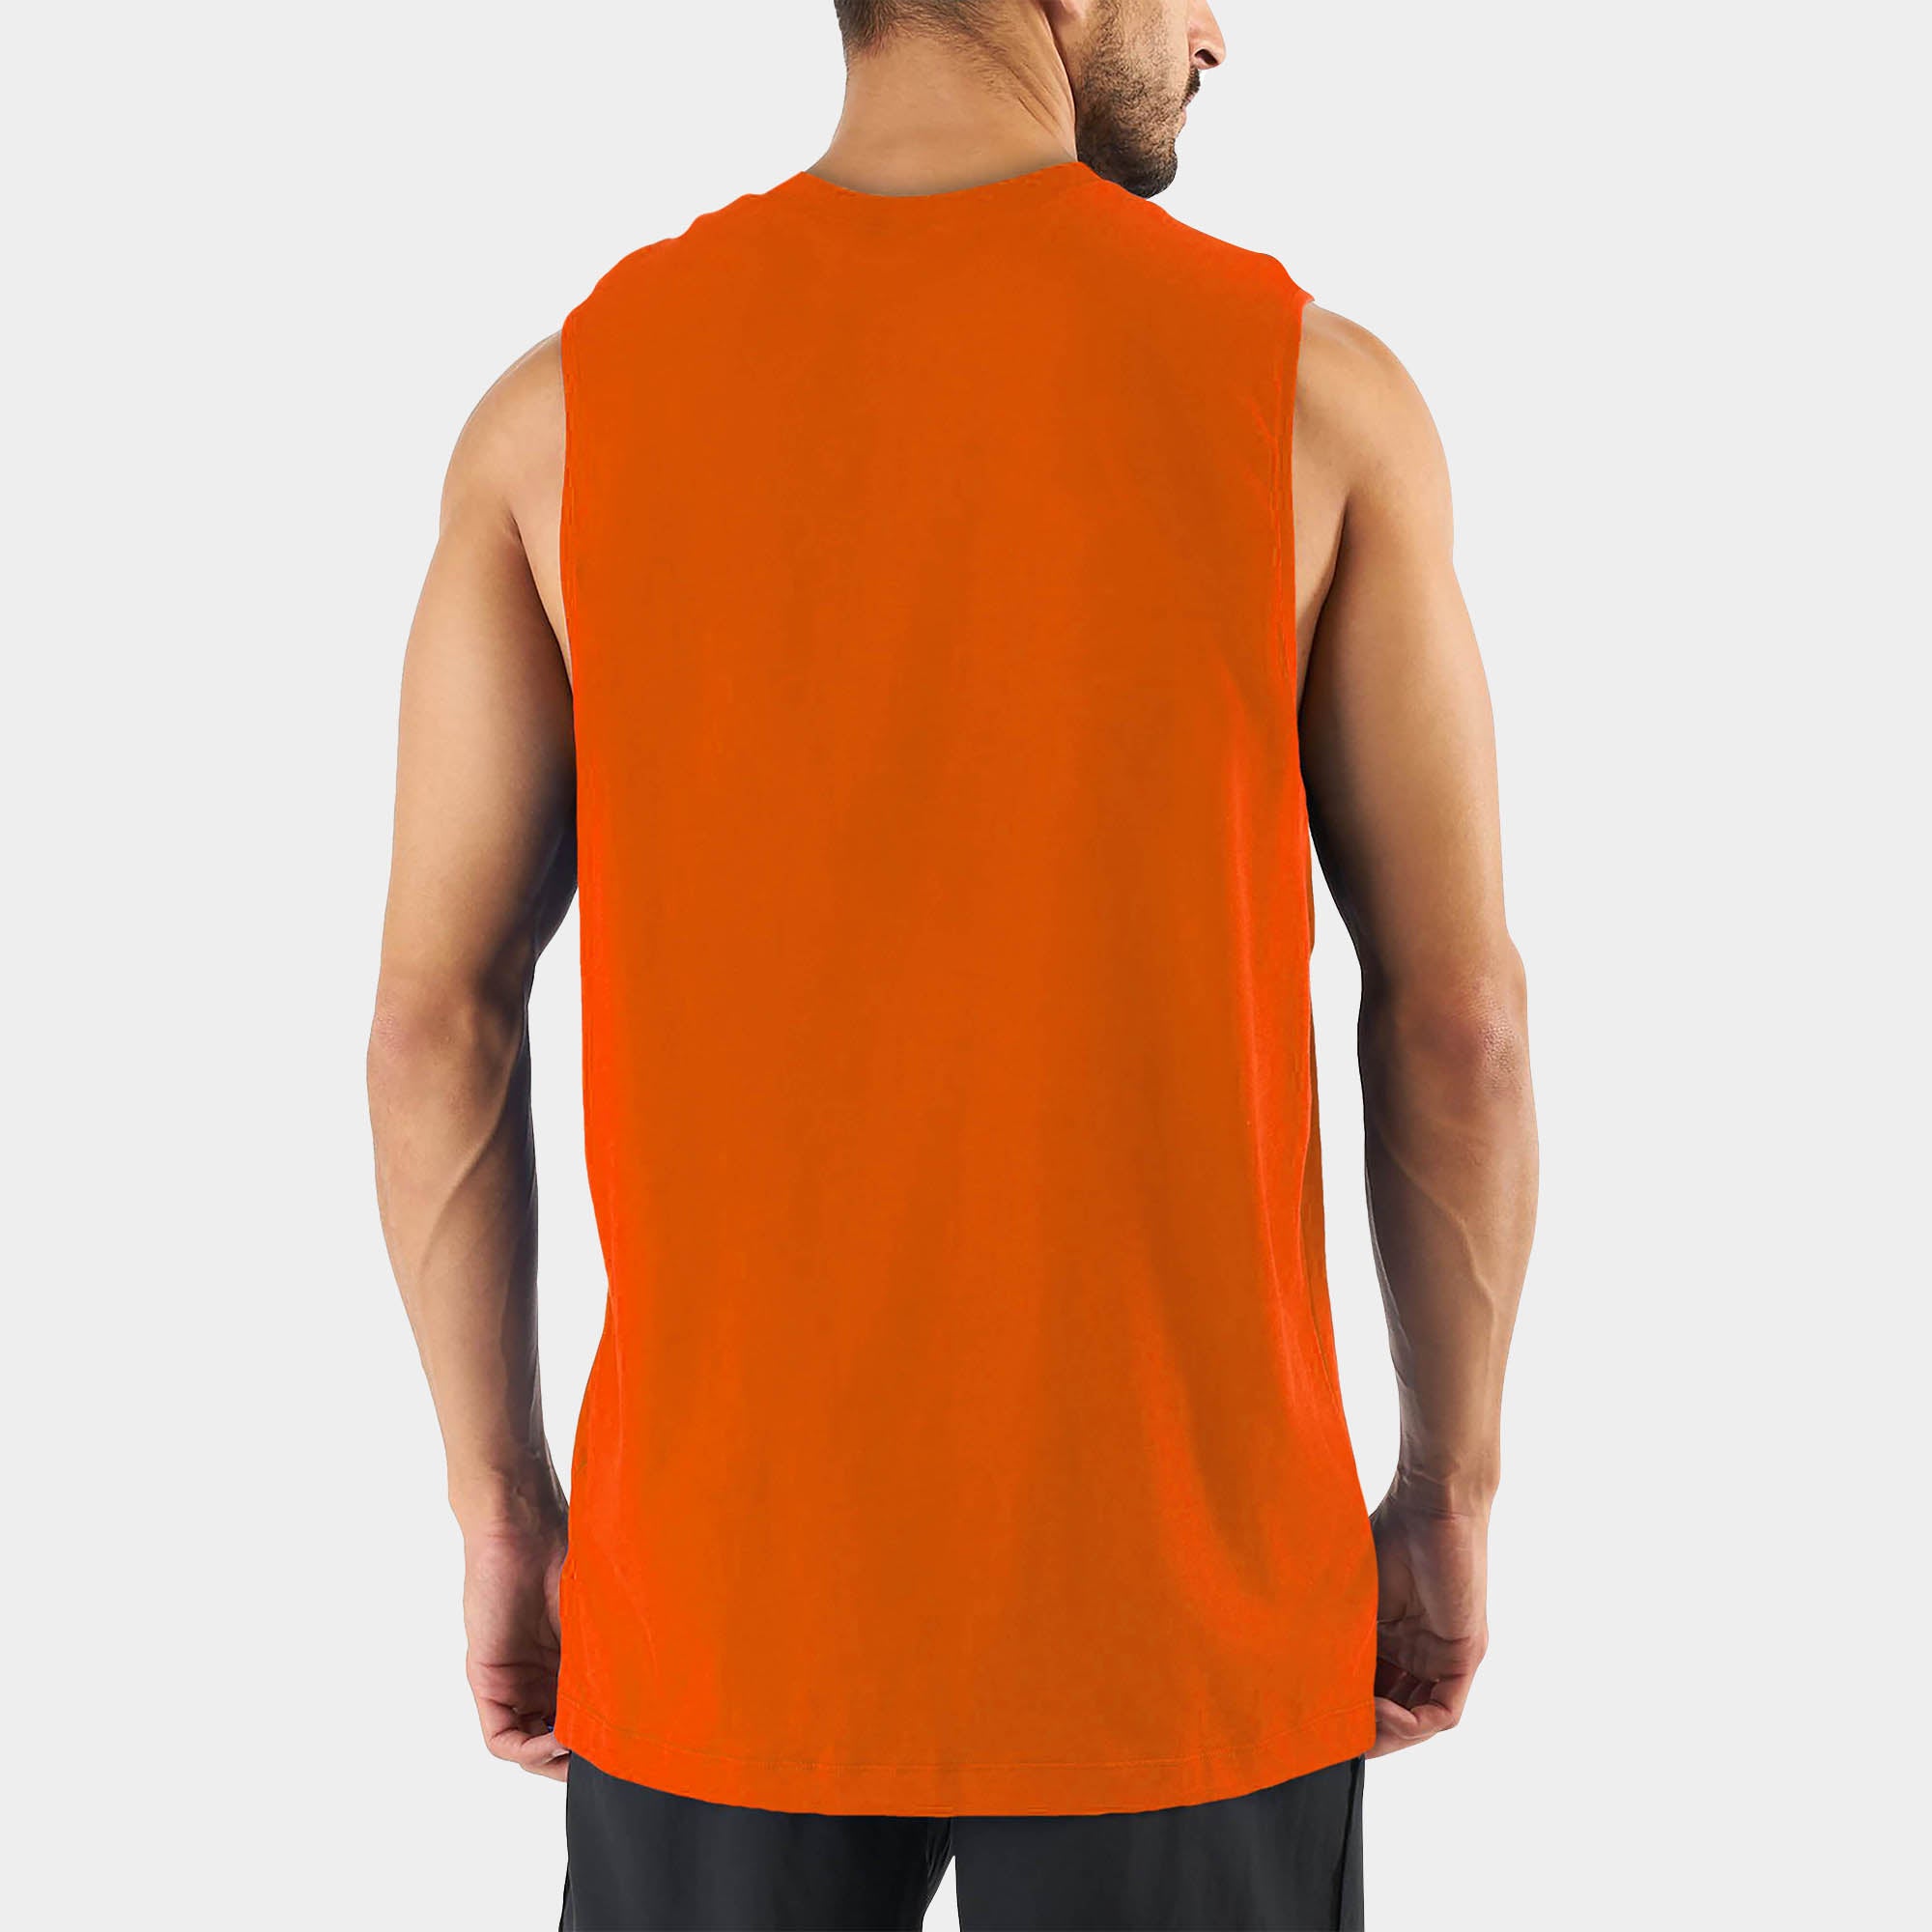 muscle tank_muscle tee_muscle tank tops_cropped muscle tank_under armour muscle shirt_insta slim tank_men muscle shirt_tank top_Orange